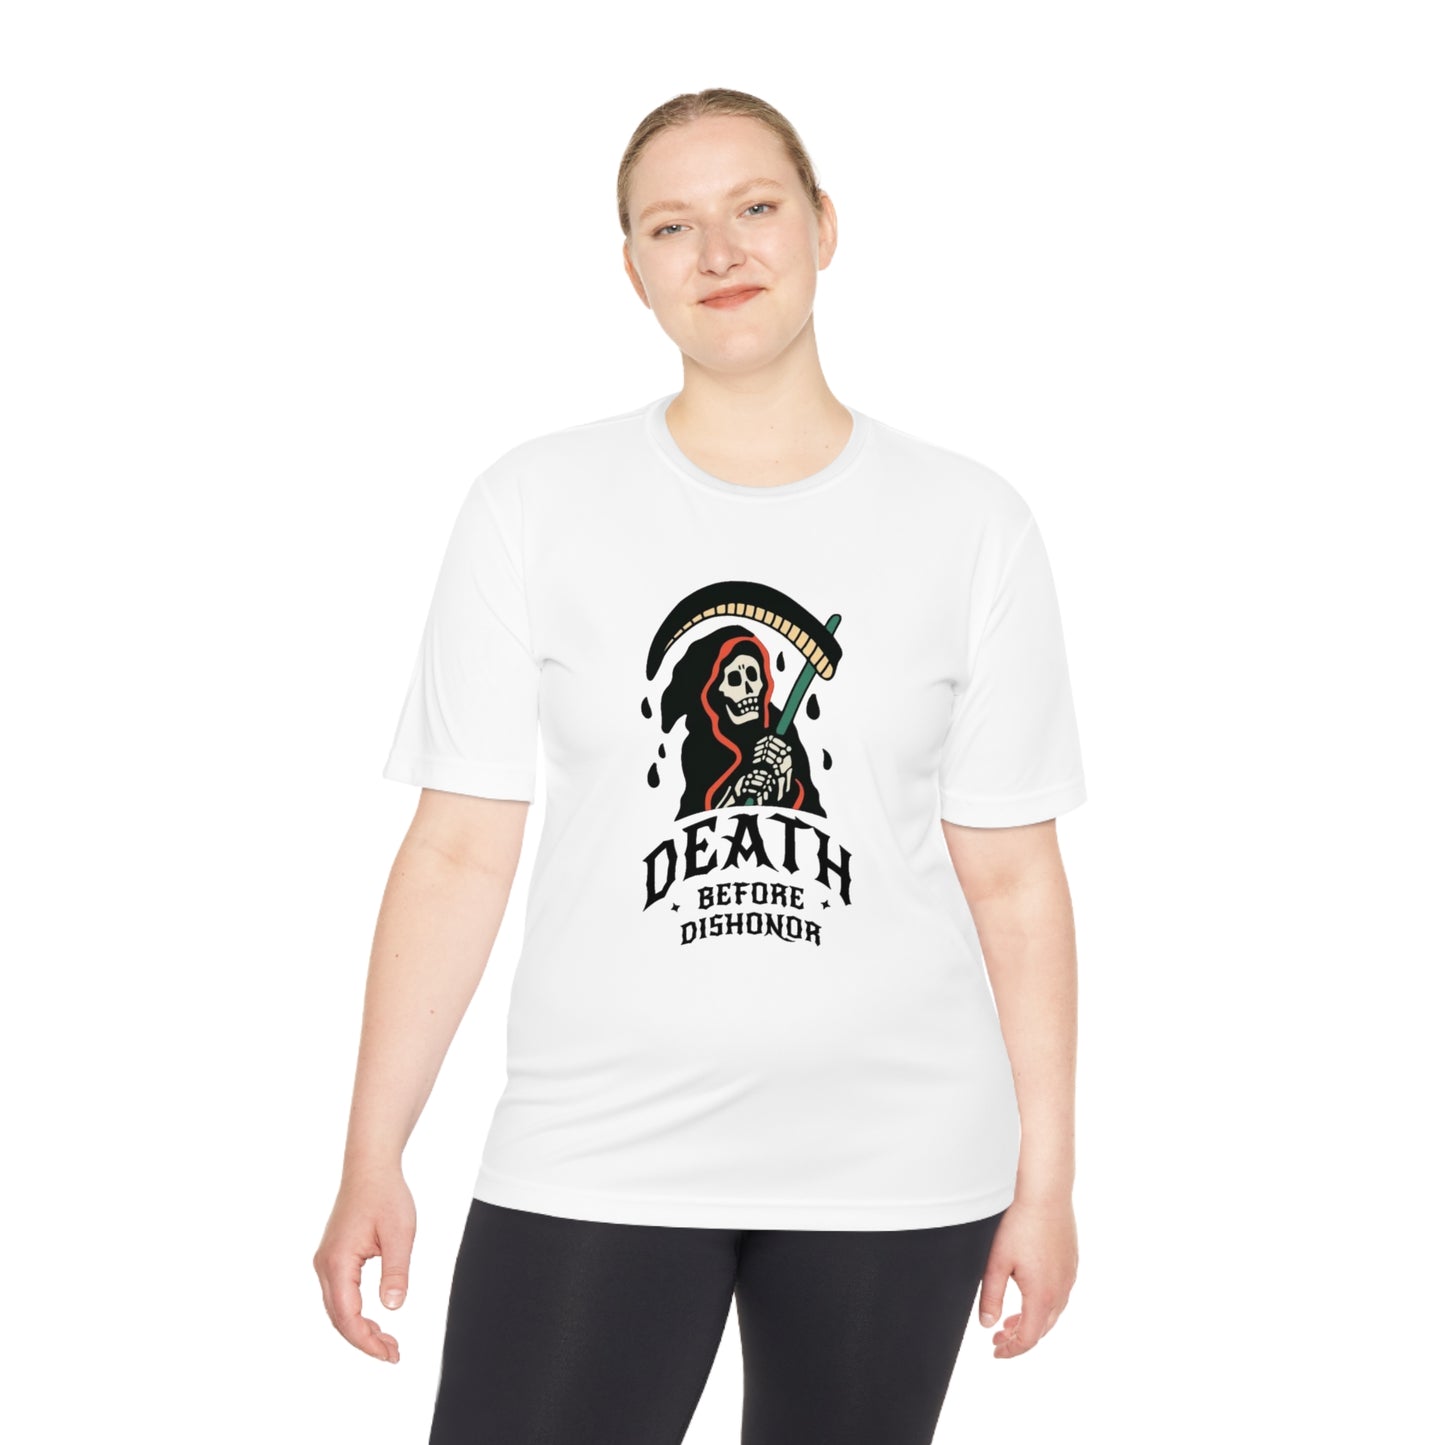 Death before dishonor Moisture Wicking Tee